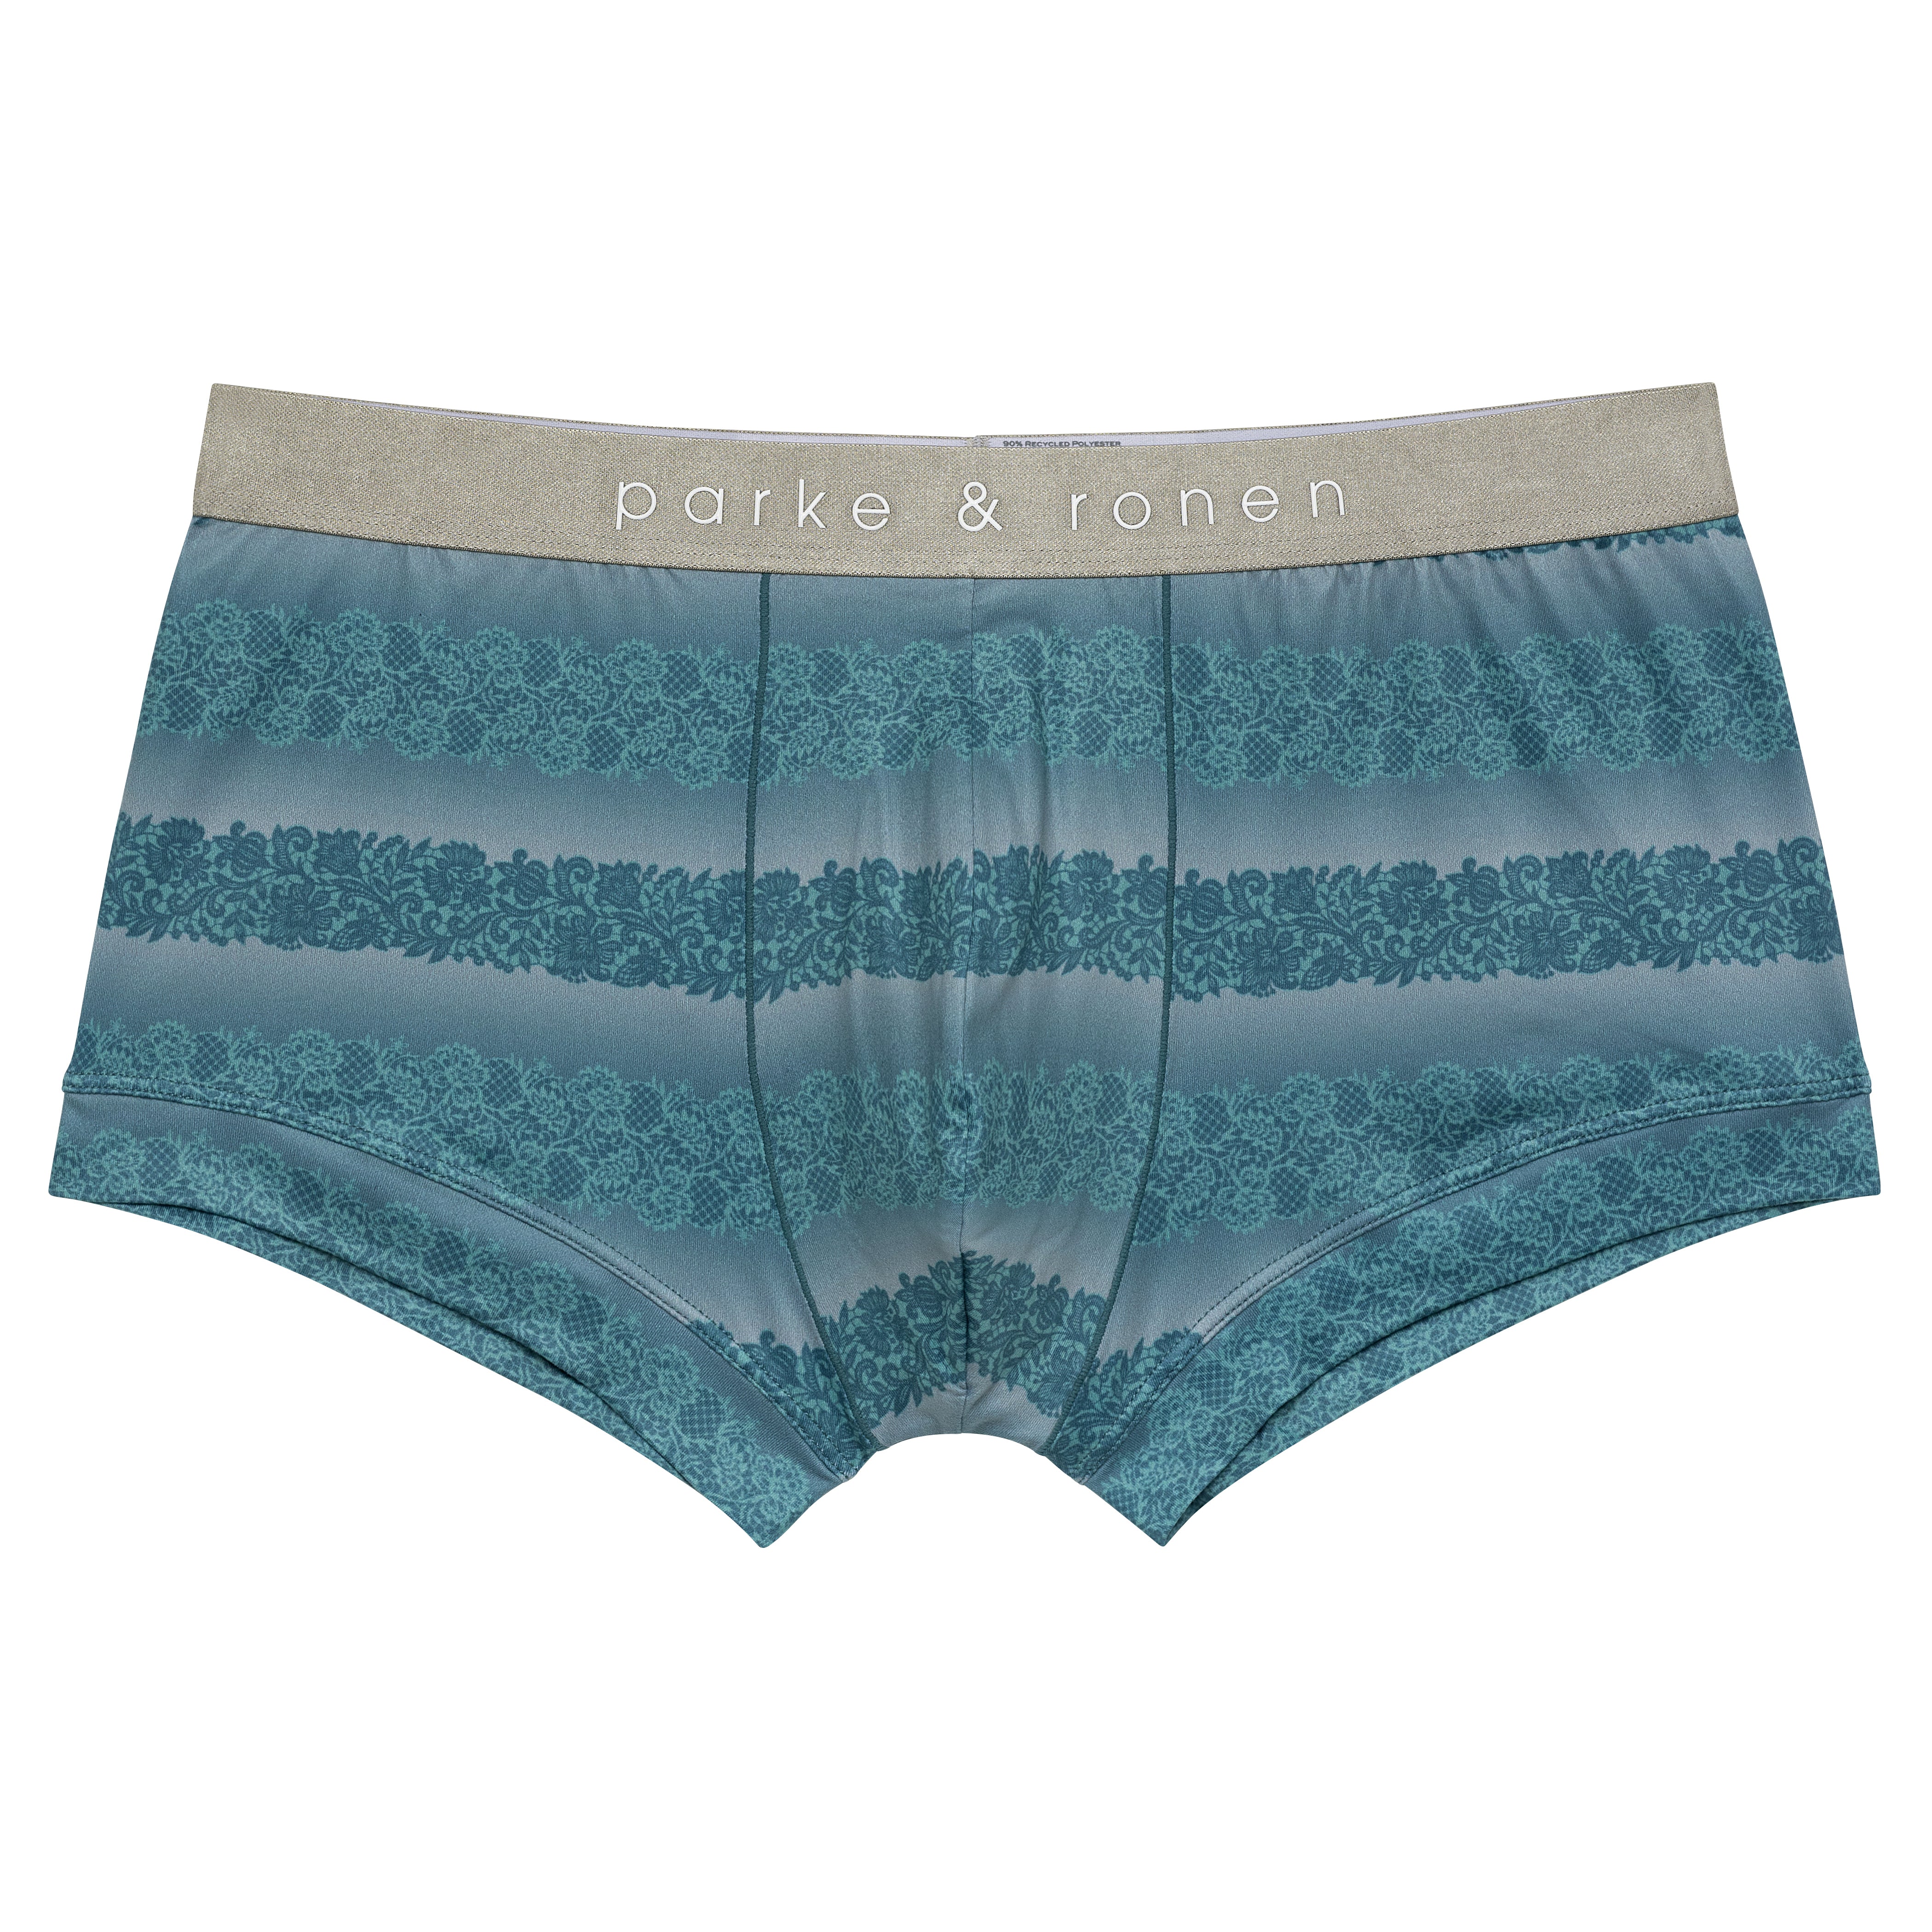 SAVE 70%- Teal Venetian Lace Low Rise Trunk